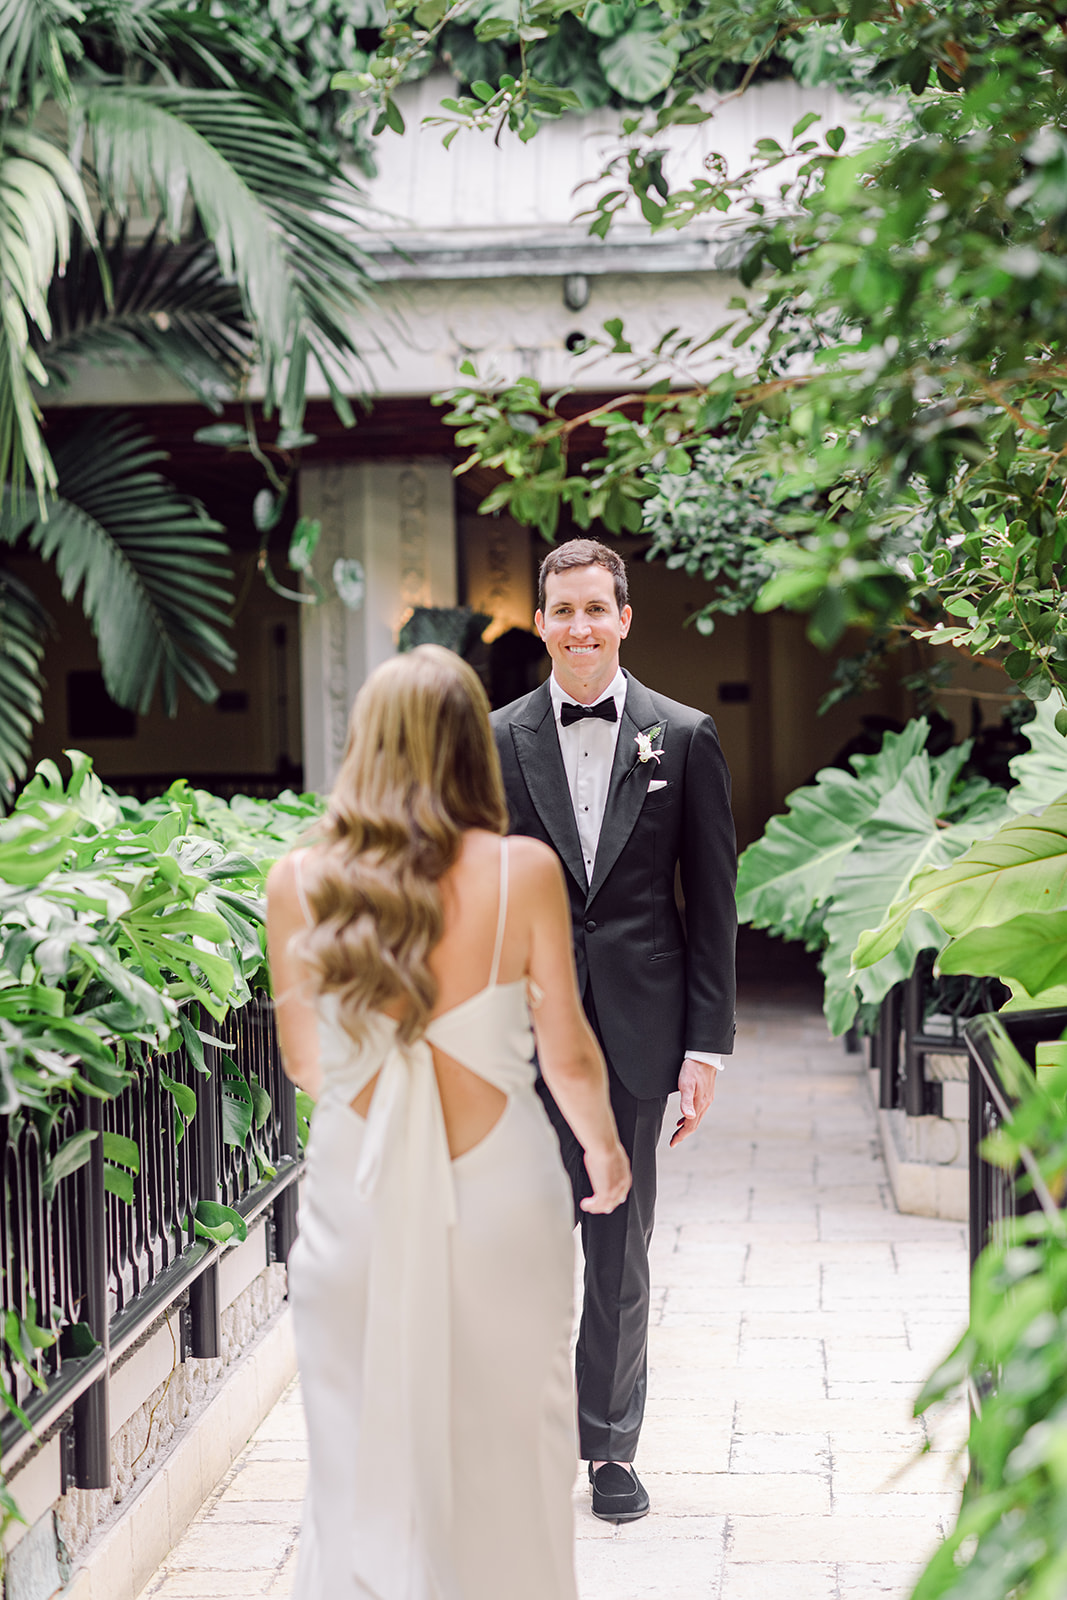 Groom sees bride for the first time during first look at Mayfair House Hotel & Garden in Miami on wedding day.